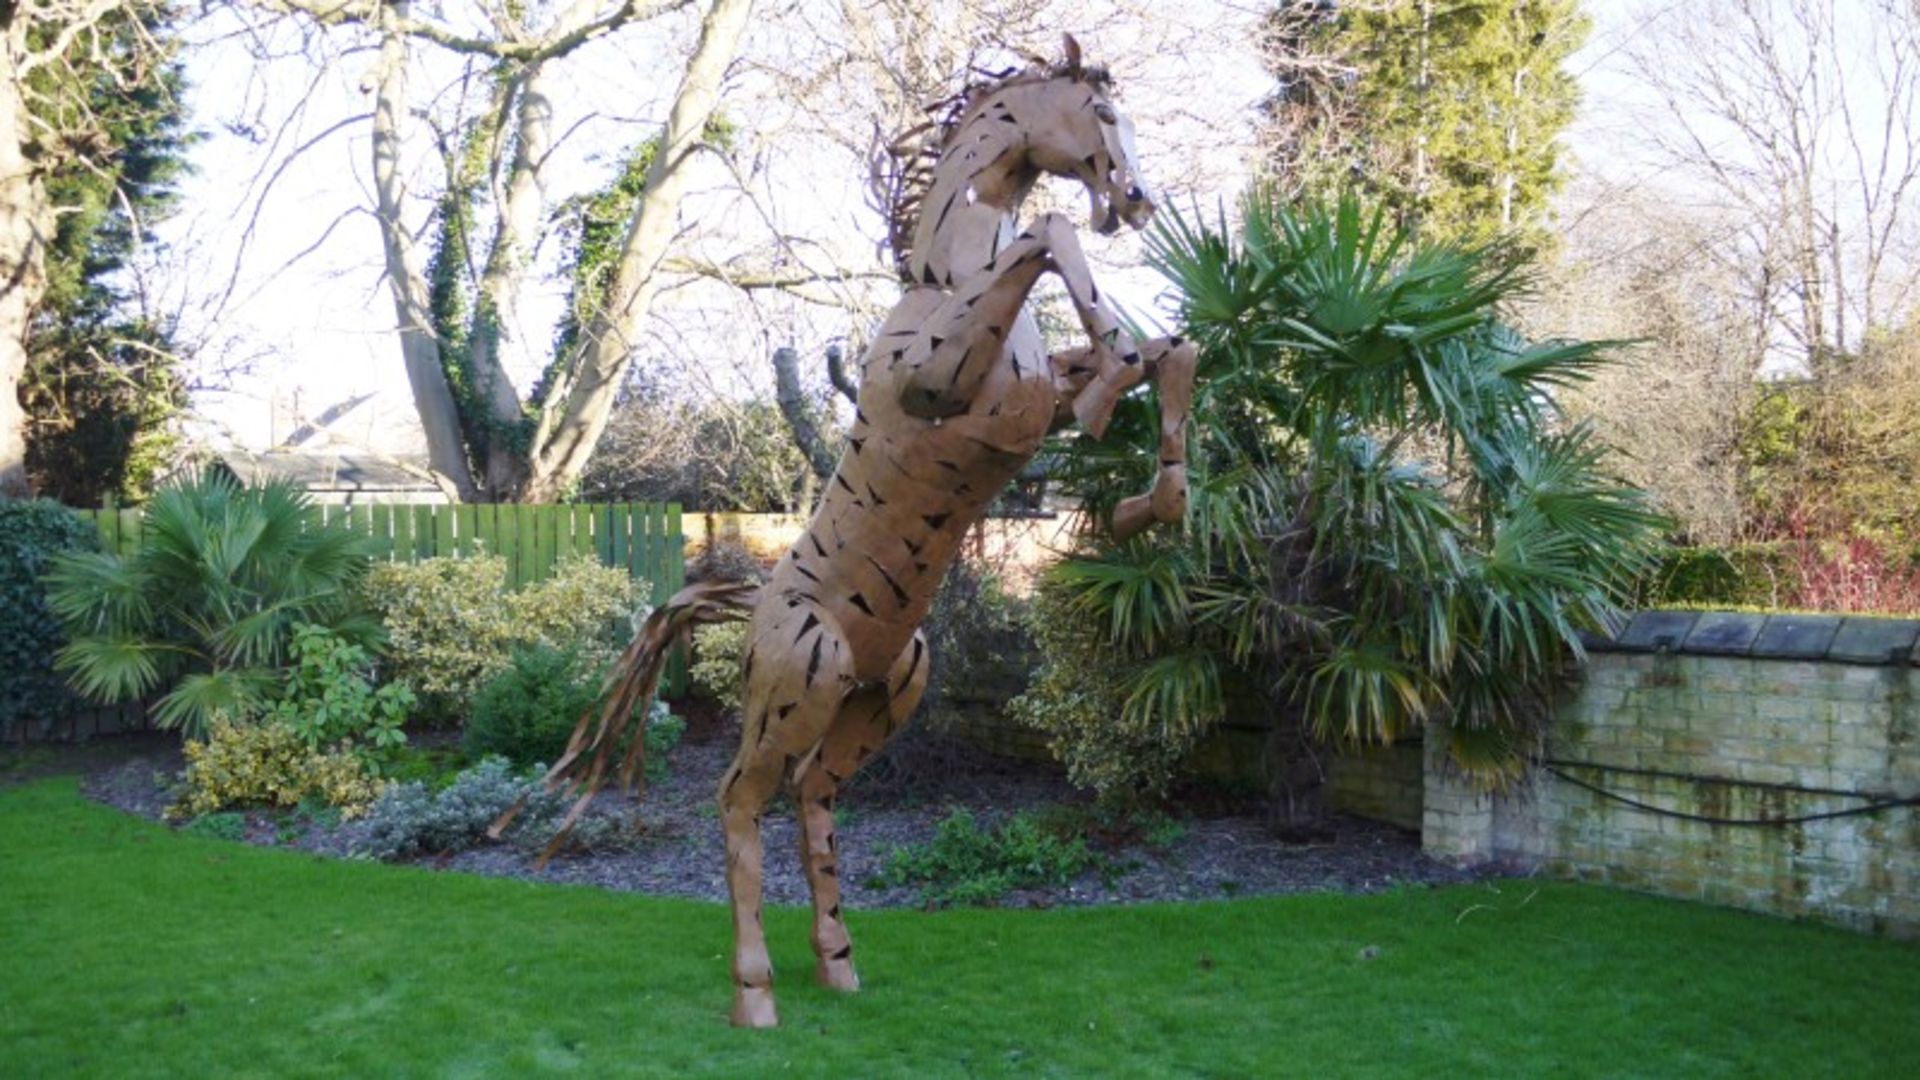 VERY RARE METAL REARING HORSE STATUE - 11 FEET HIGH ! - Image 7 of 7